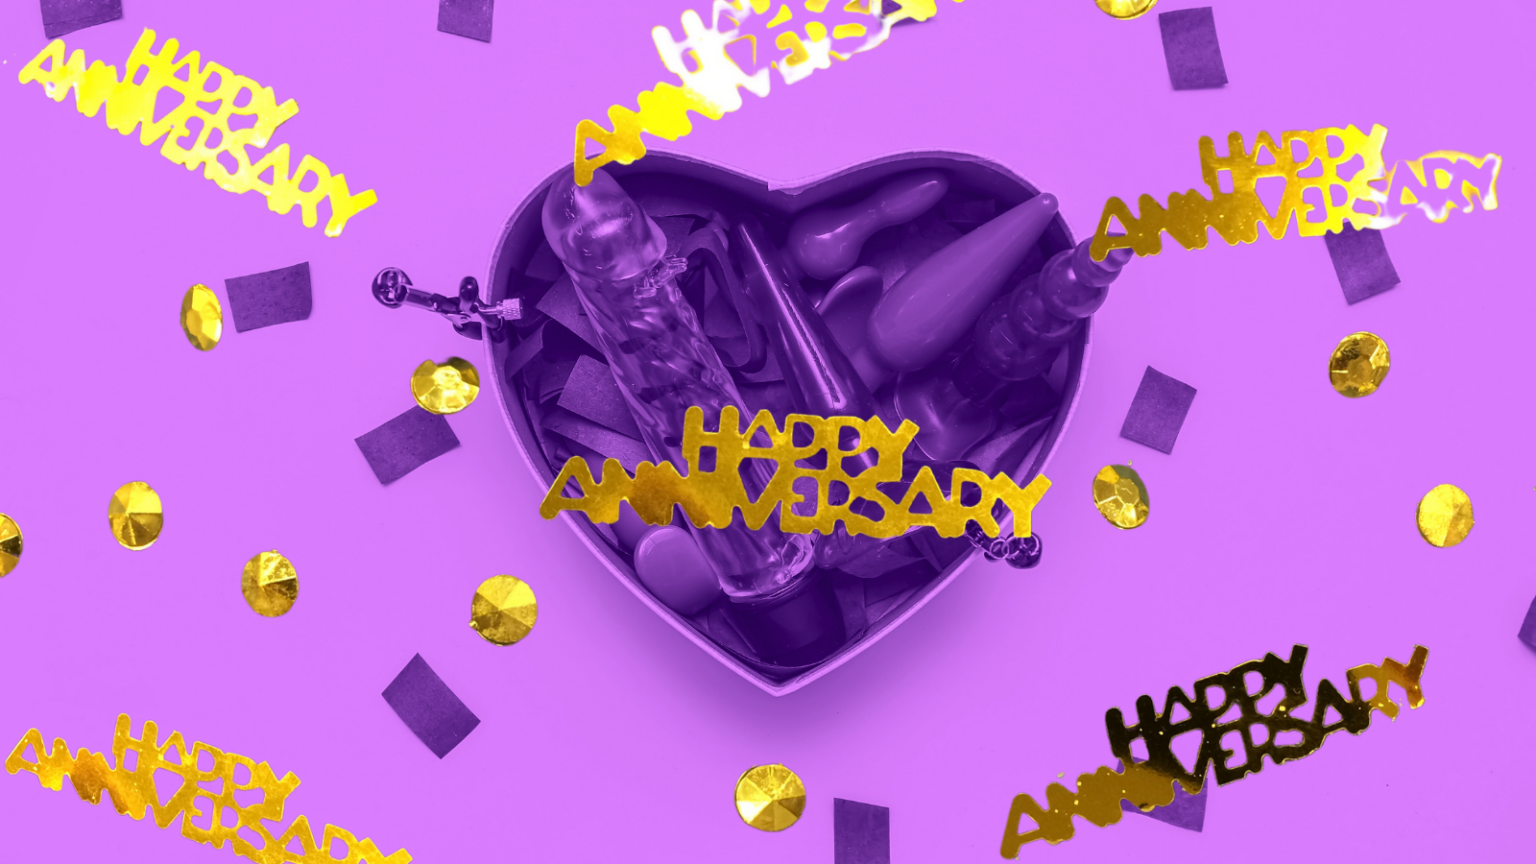 Photo of a heart shaped box of sex toys with "Happy Anniversary" confetti